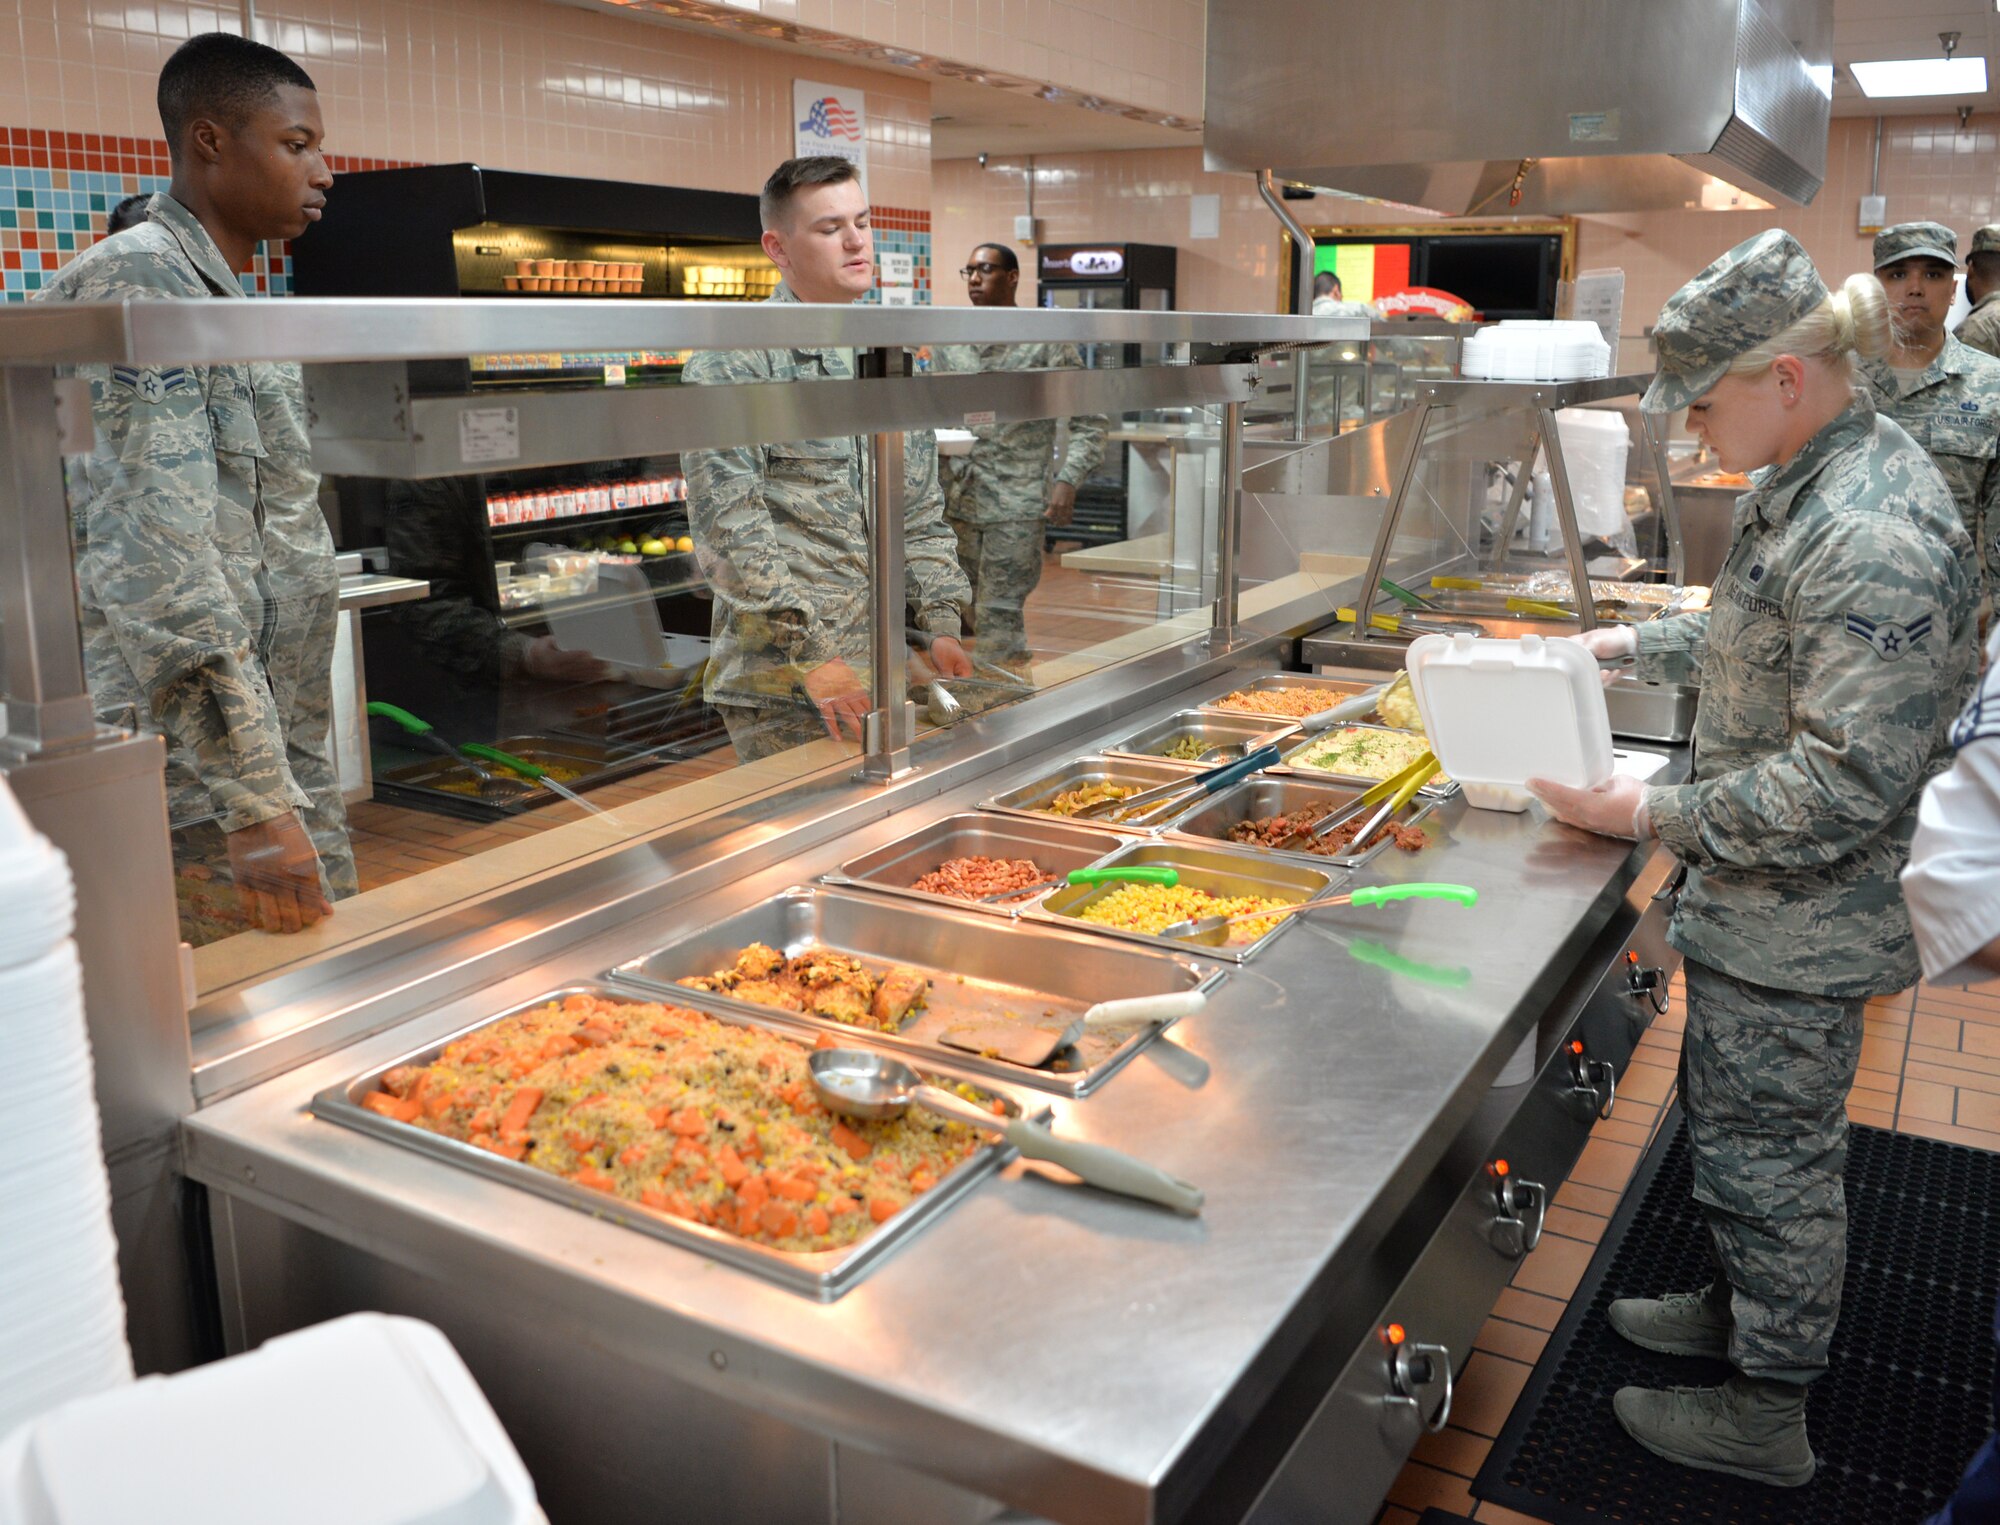 Airman 1st Class Riley, 319th Force Support Squadron food service journeyman, Grand Forks AFB, N.D., serves lunch for service members during Red Flag 19-3 at Nellis Air Force Base, Nev., July 18, 2019. Red Flag was established in 1975 to better prepare our forces for combat. Lessons from Vietnam showed that if a pilot survived 10 combat missions, his chances of surviving remaining missions increased significantly. (U.S. Air Force photo by Tech. Sgt. Bryan Magee)